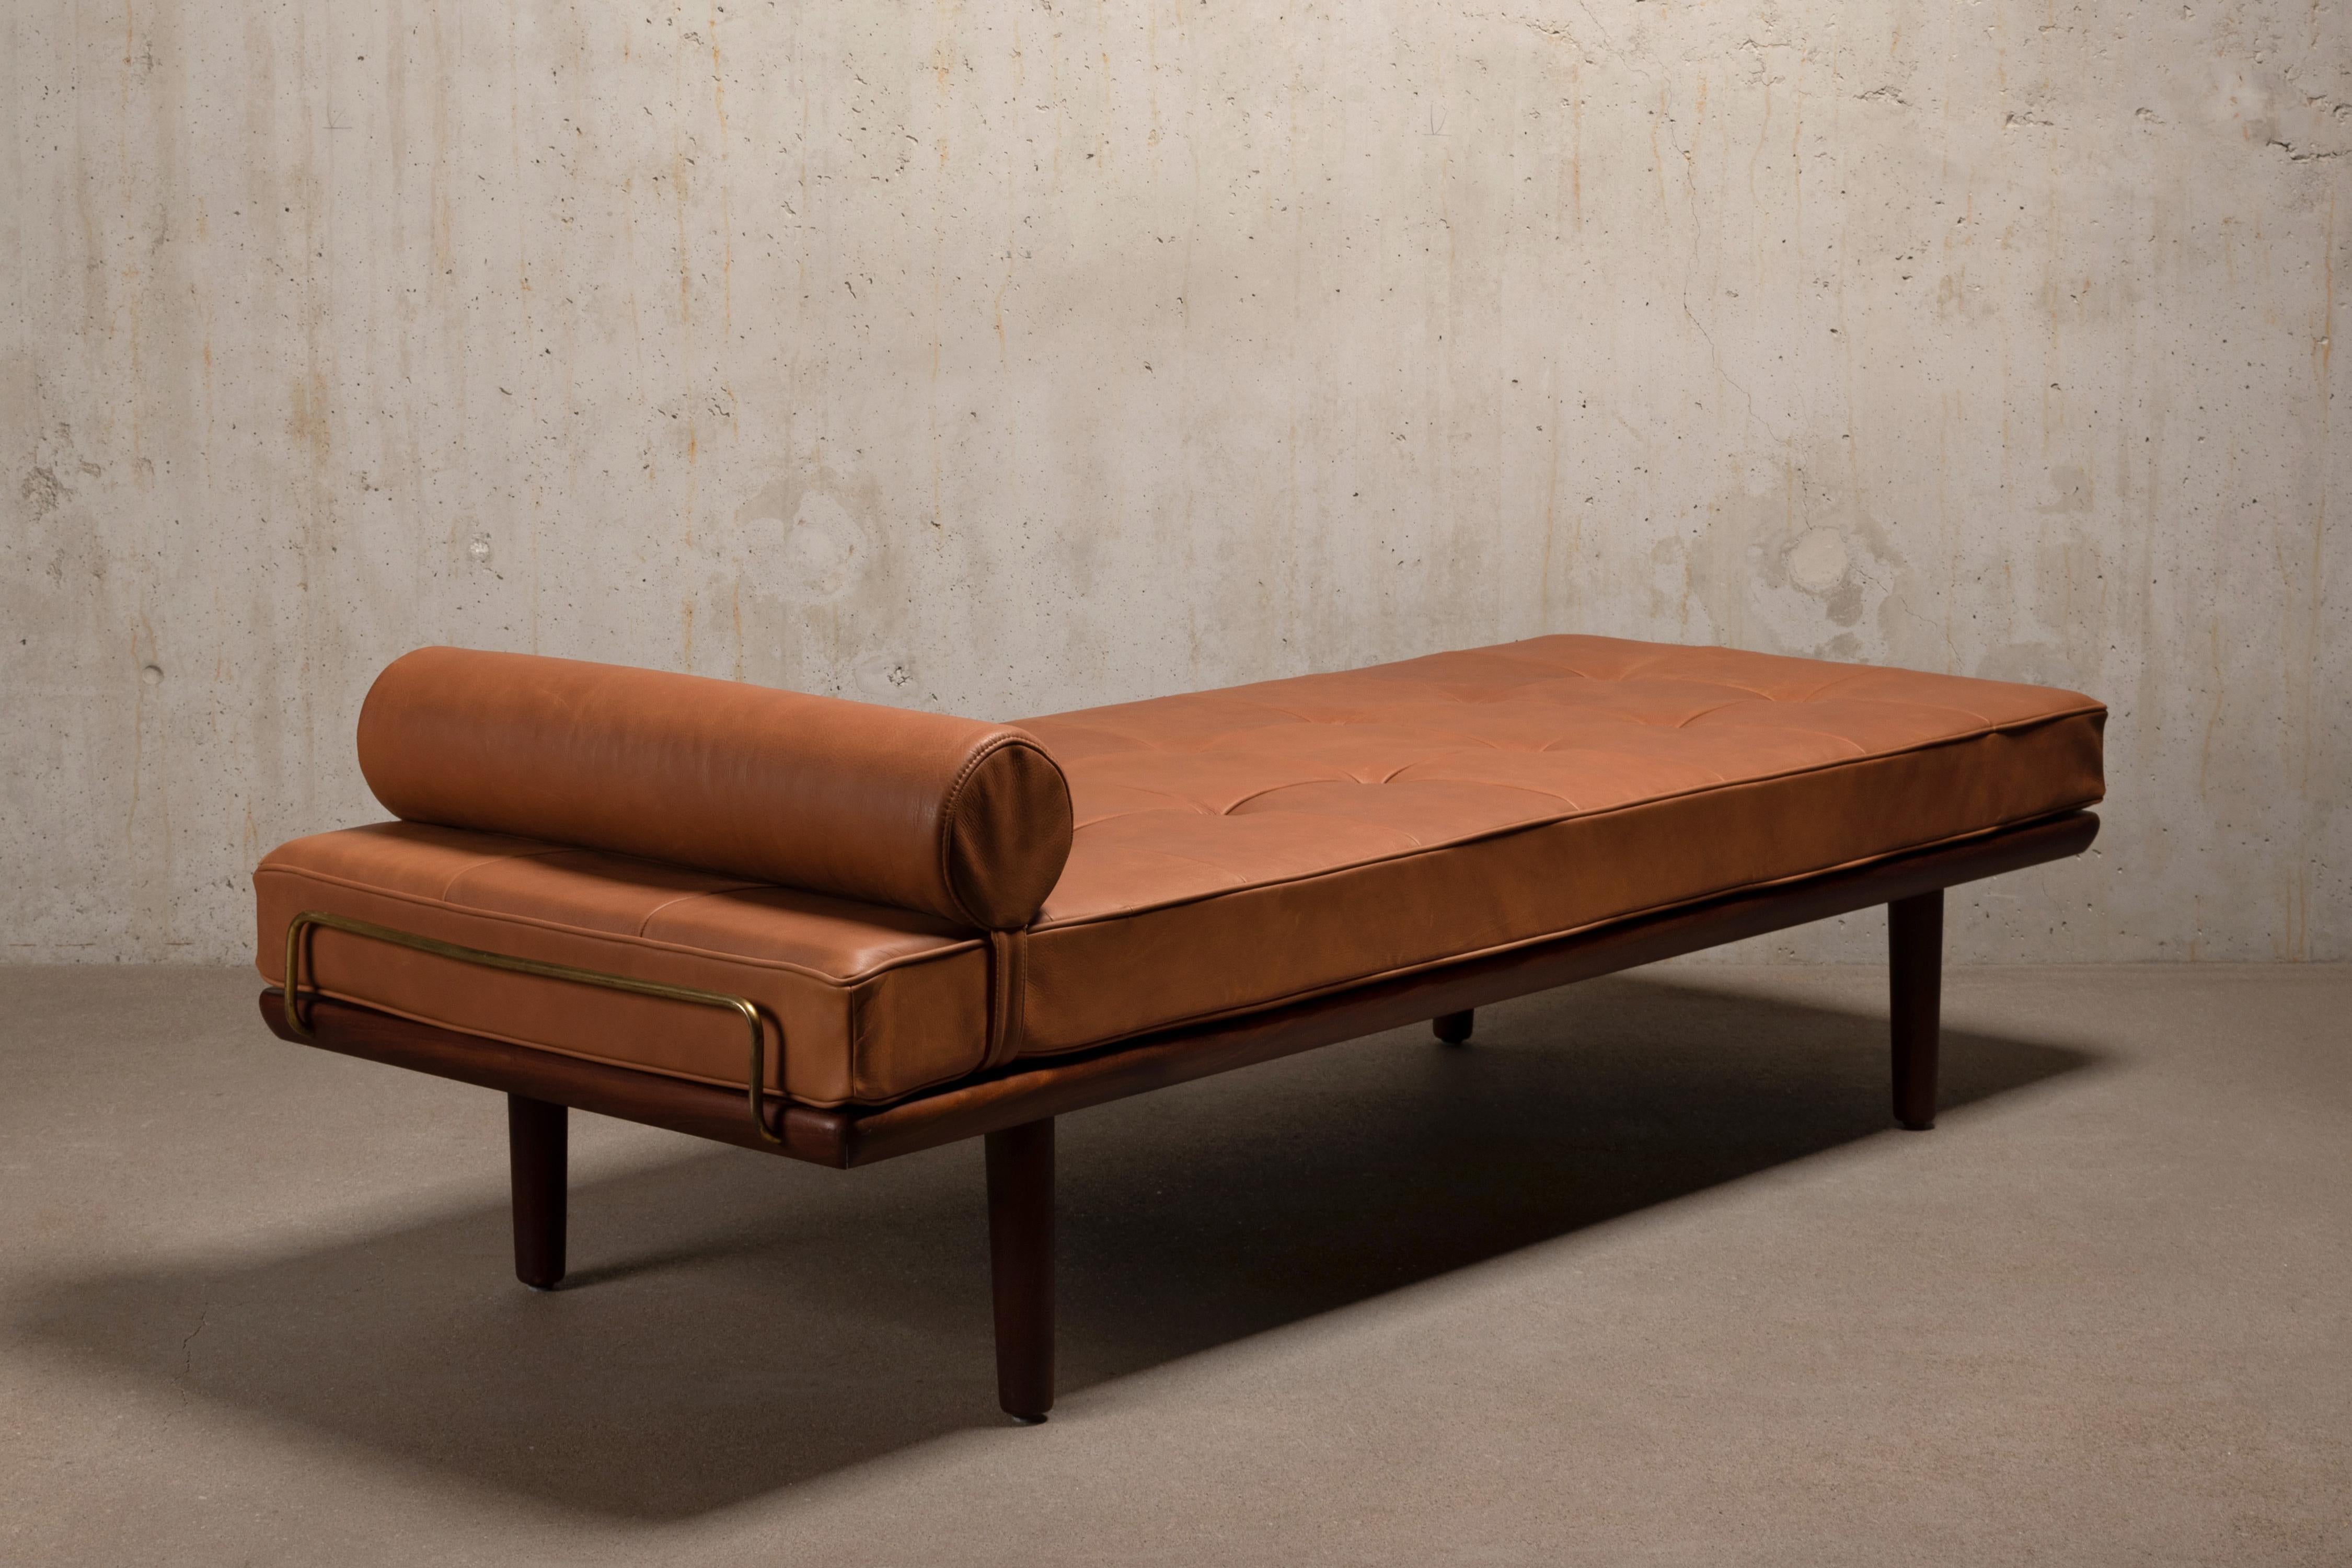 Great daybed Model GE19, designed by Hans Hans J. Wegner for GETAMA Denmark in 1956. Teak frame with tapered legs and brass brackets in good condition with minor traces of use. New mattress and neck roll pillow upholstered in beautiful high quality